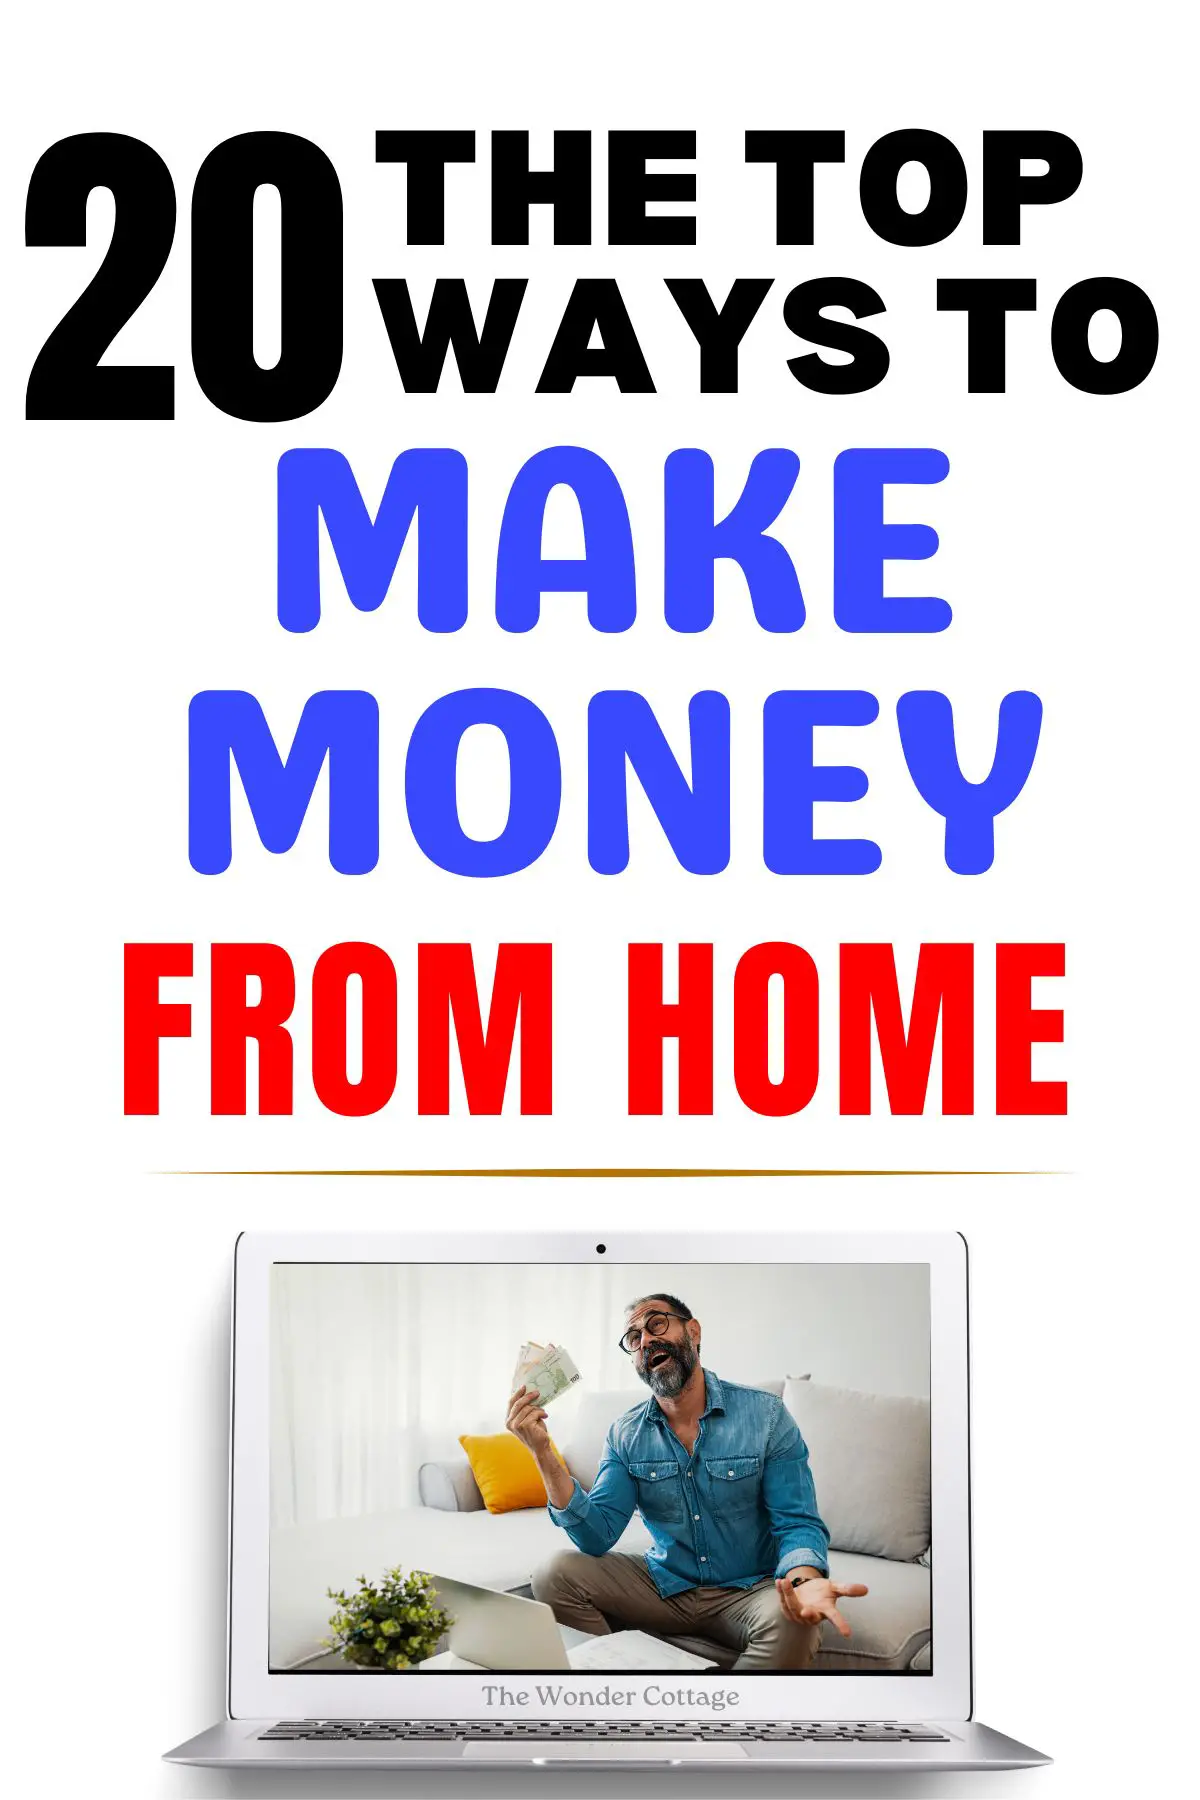 The Top 20 Ways To Make Money From Home